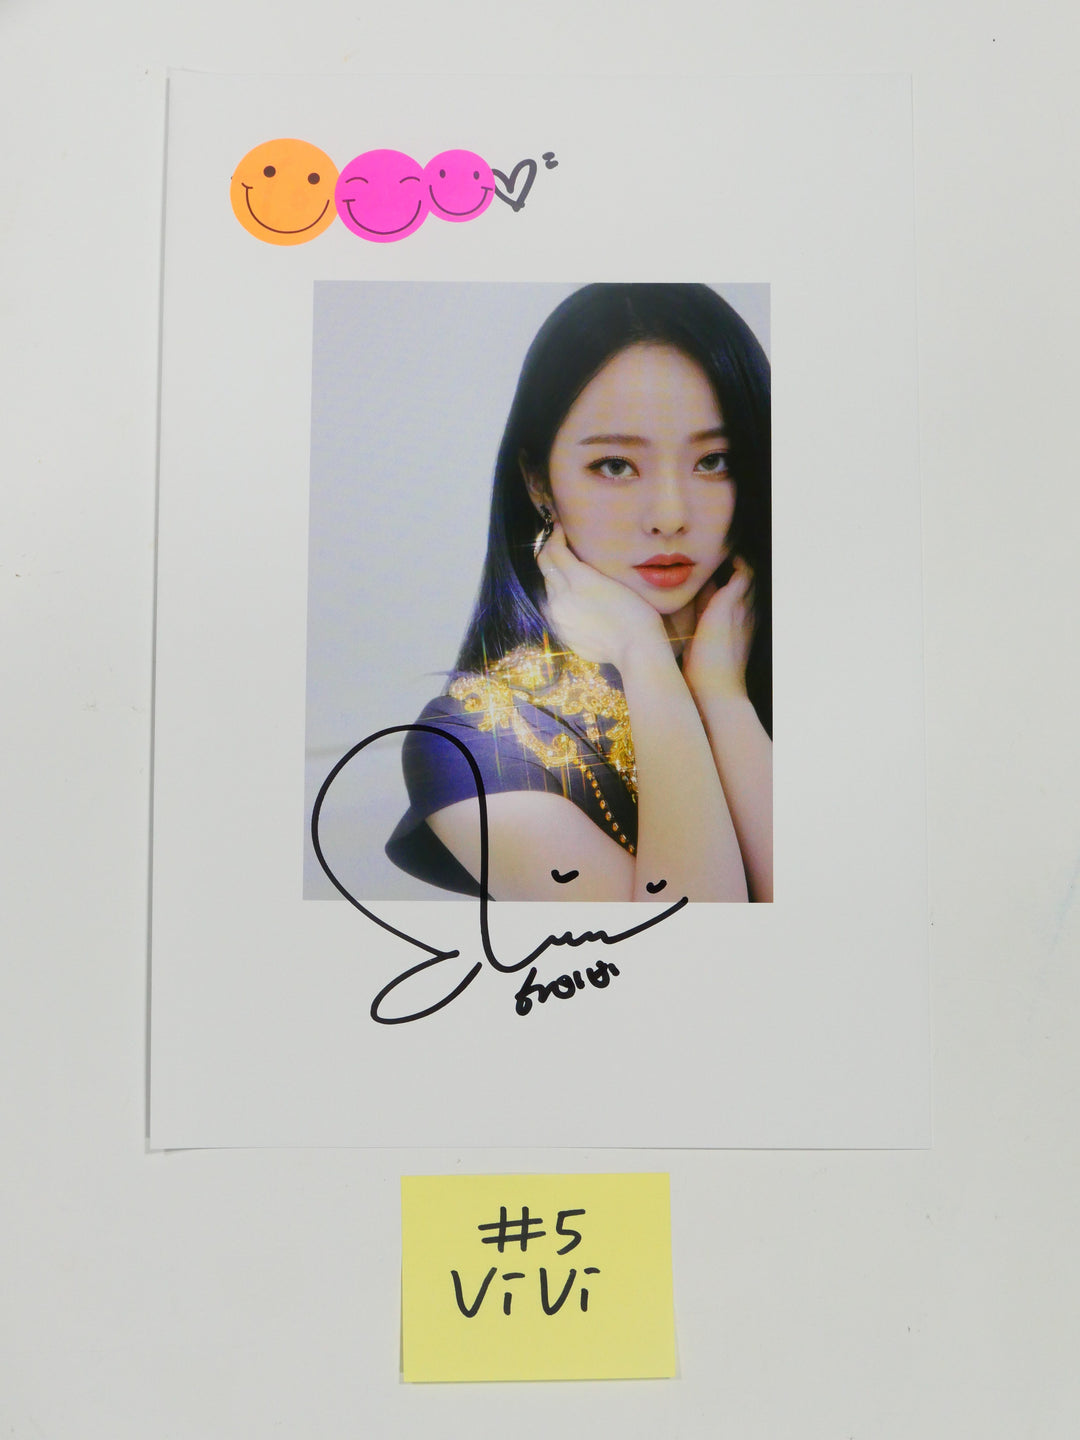 Loona '&' - A Cut Page From Fansign Event Albums